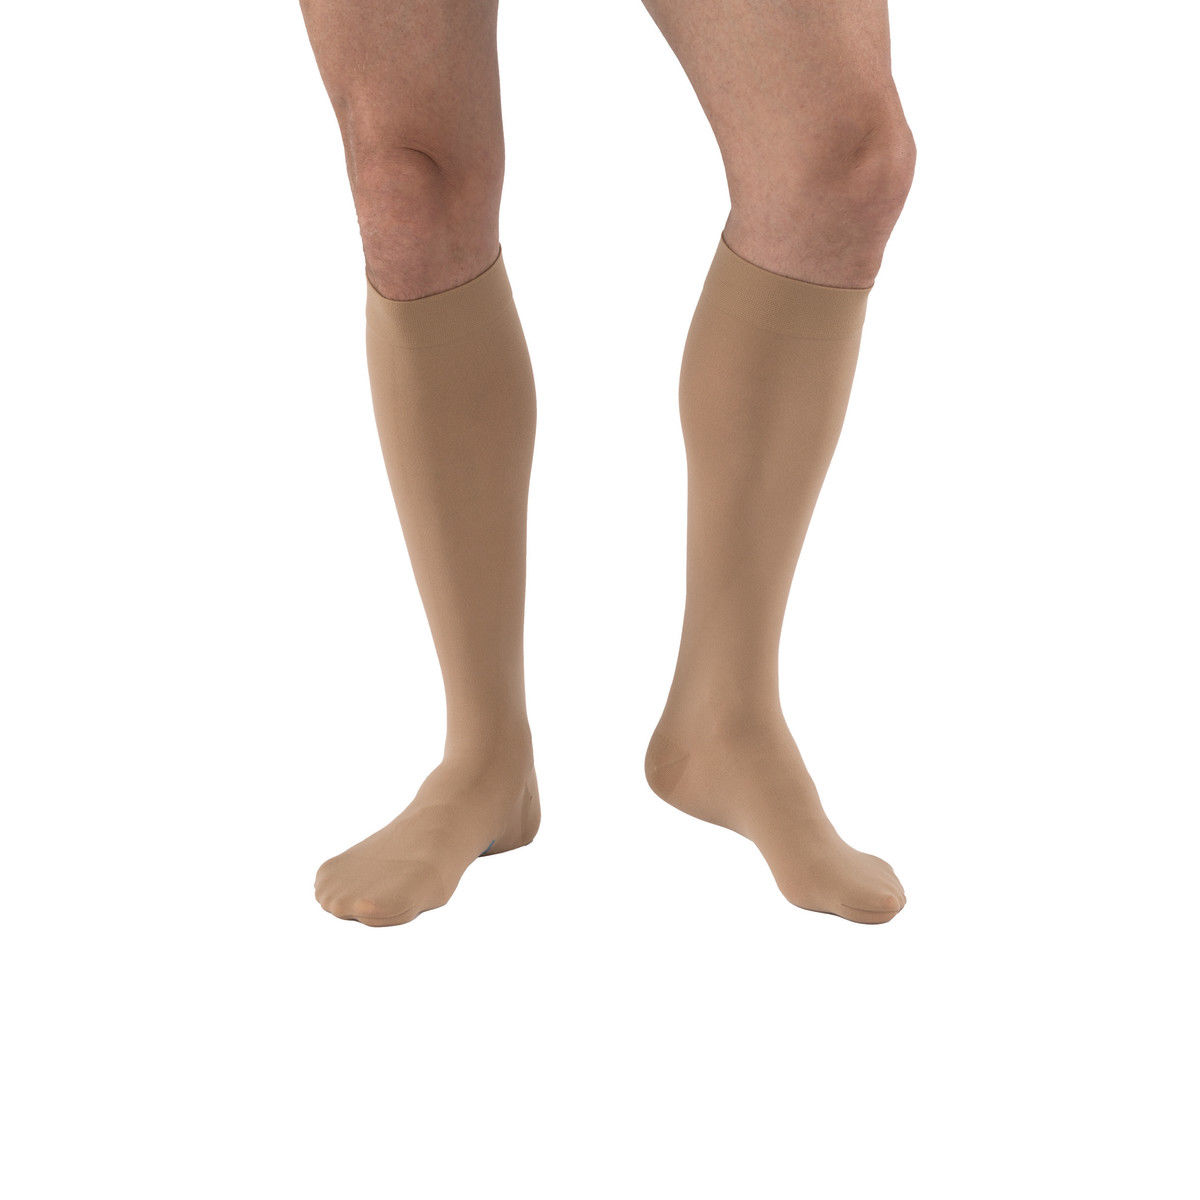 Compression T-Shirts - Lymphedema Stockings - Compression Garments